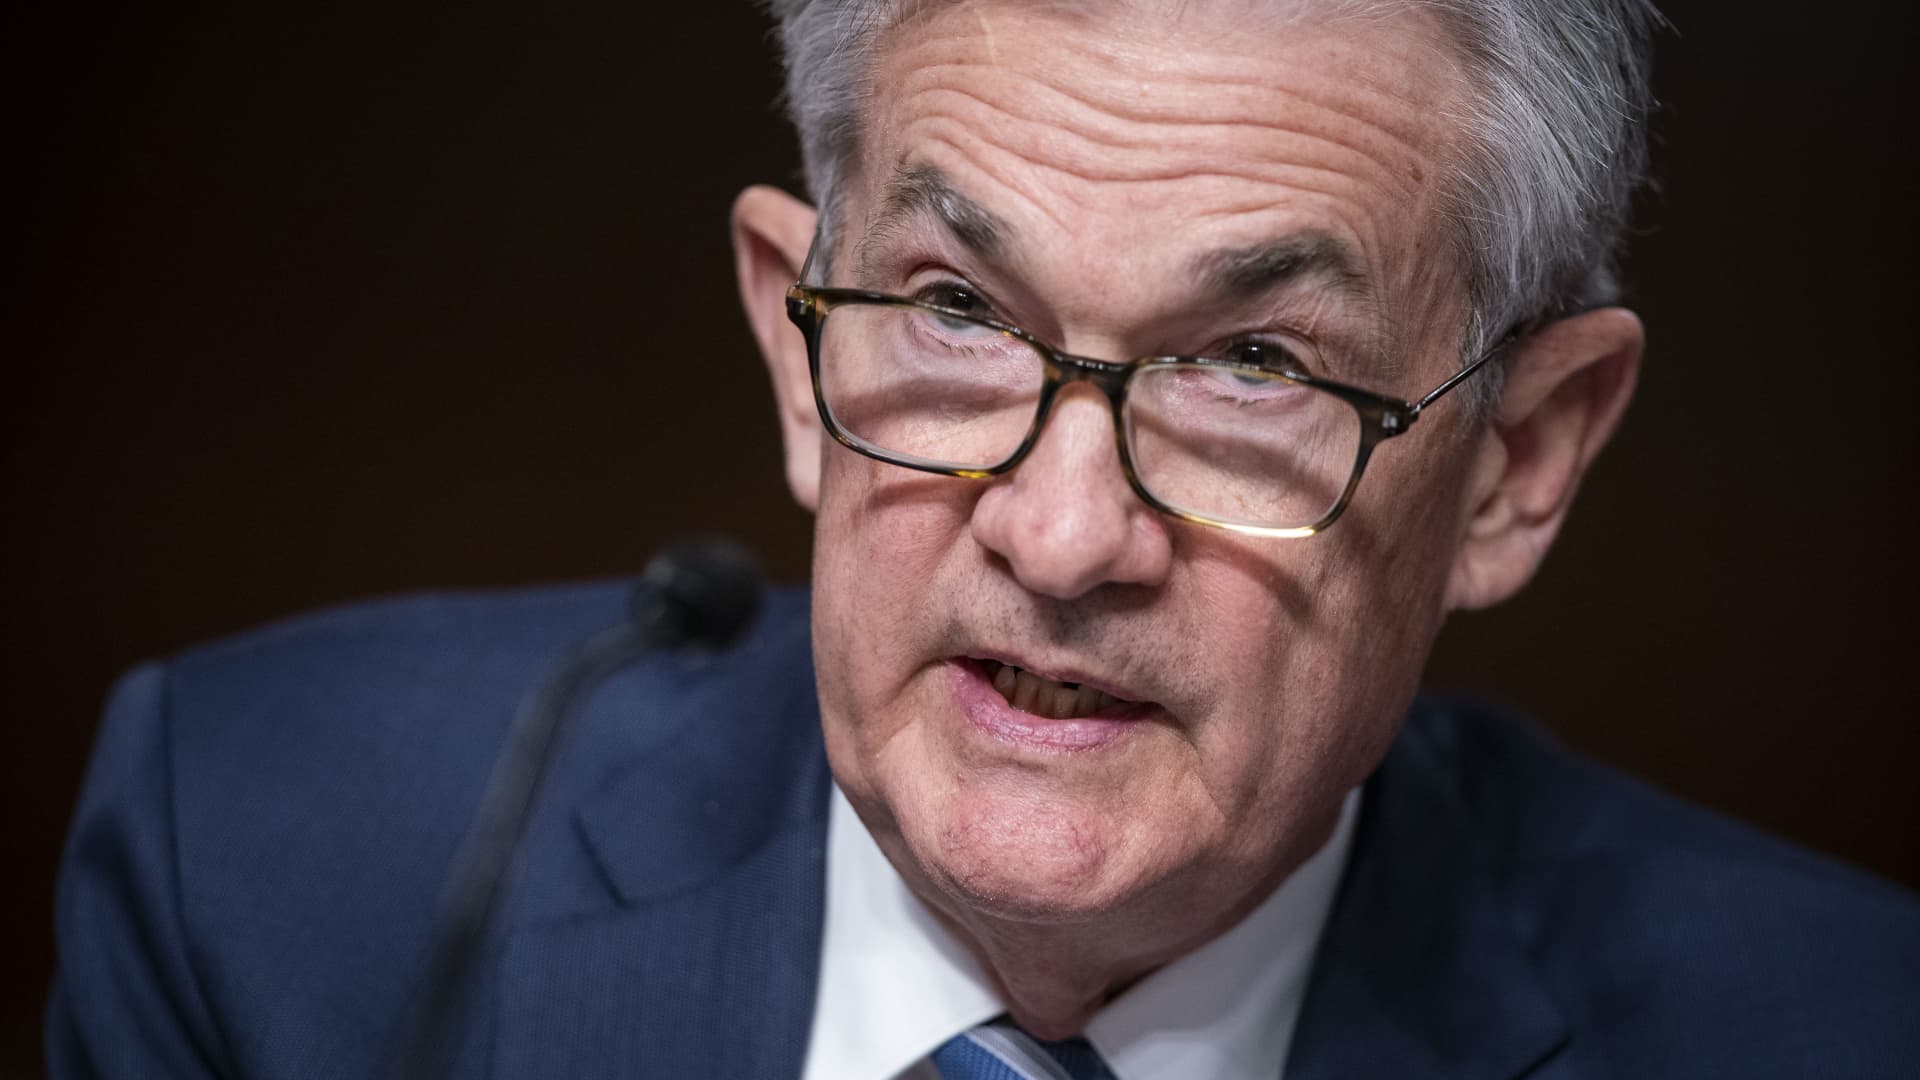 A full recap of the Fed’s rate hike decision and Powell’s market-moving comments